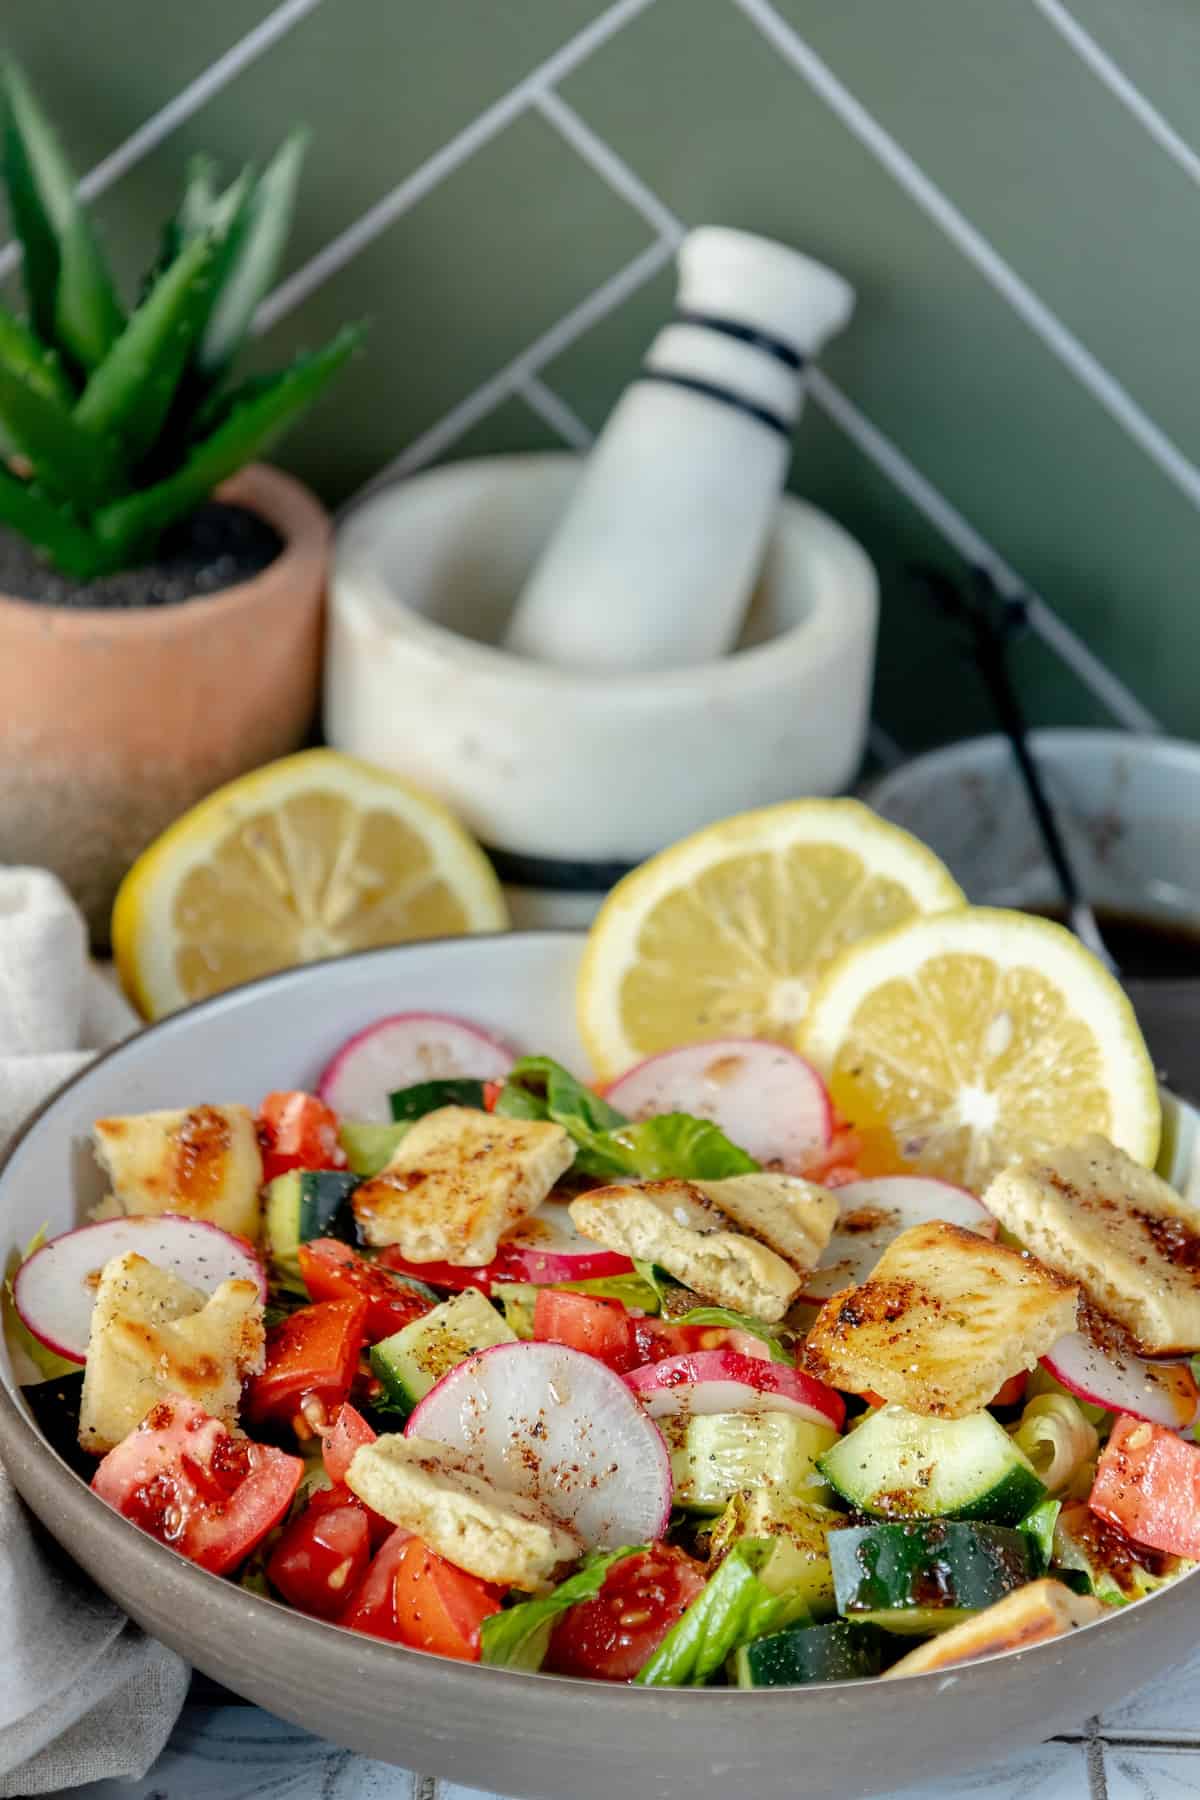 A Fattoush salad with lemons and a mortar.